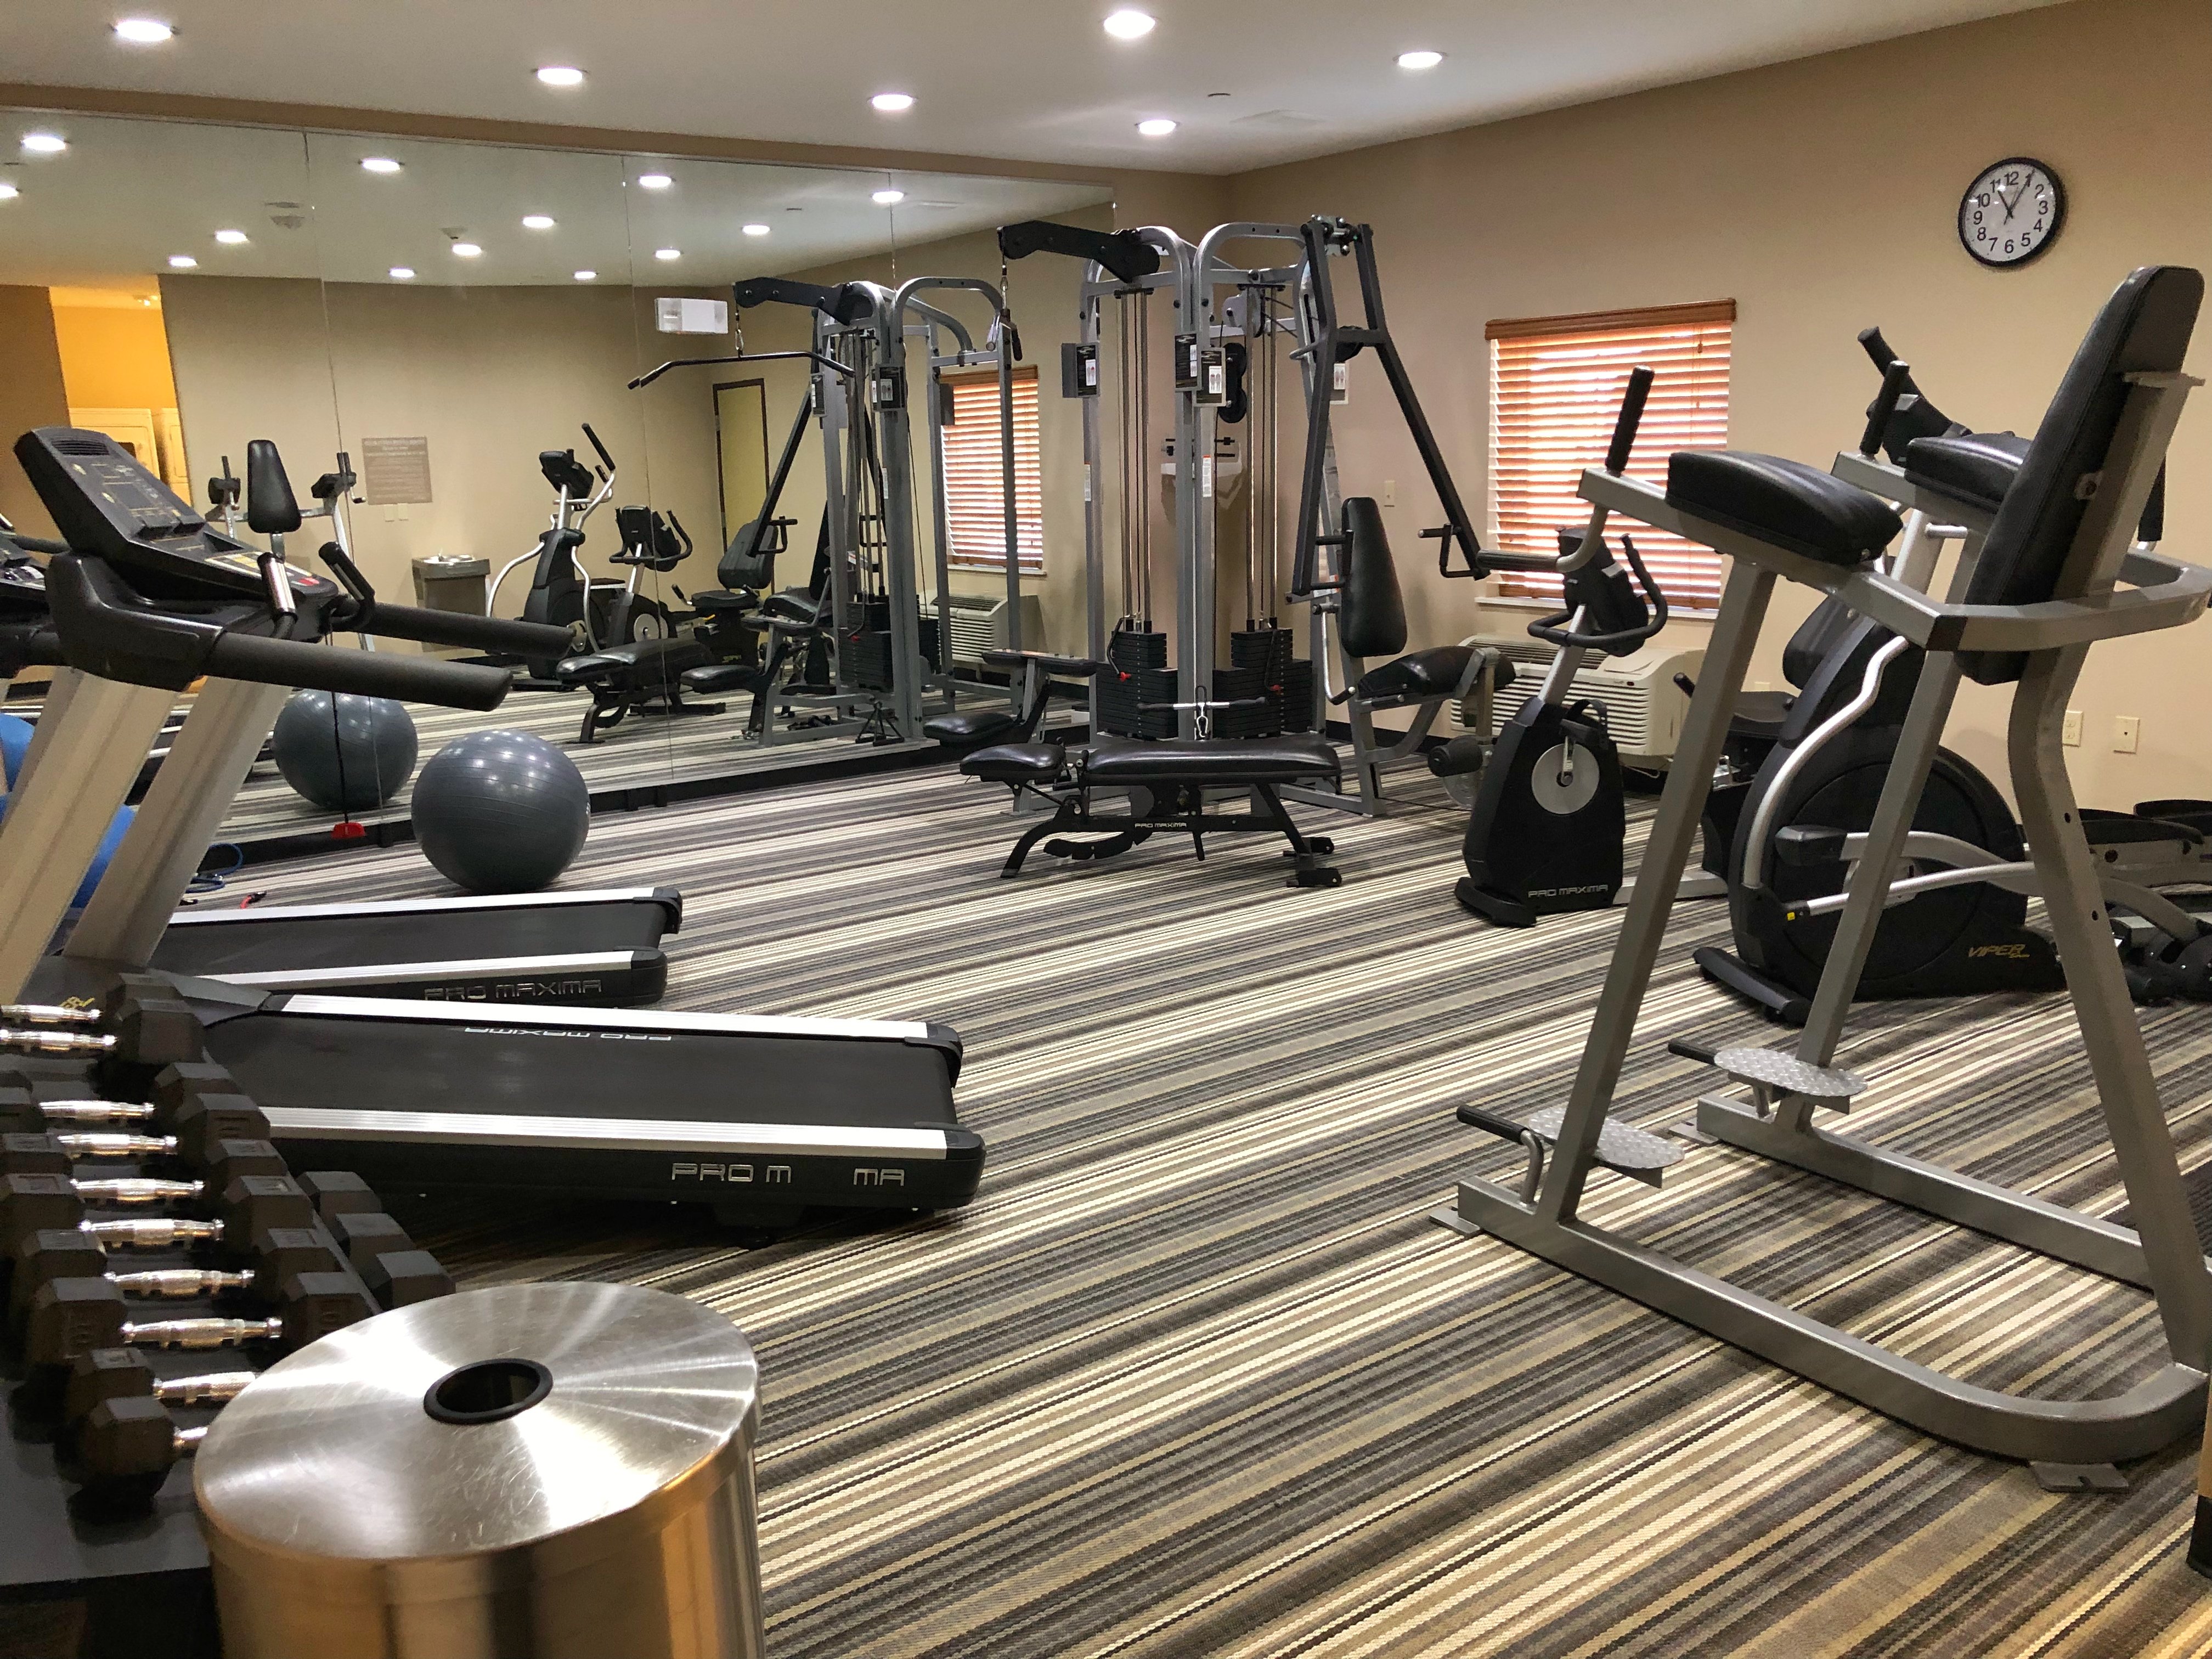 Candlewood Suites Houma Fitness Center has a great variety 